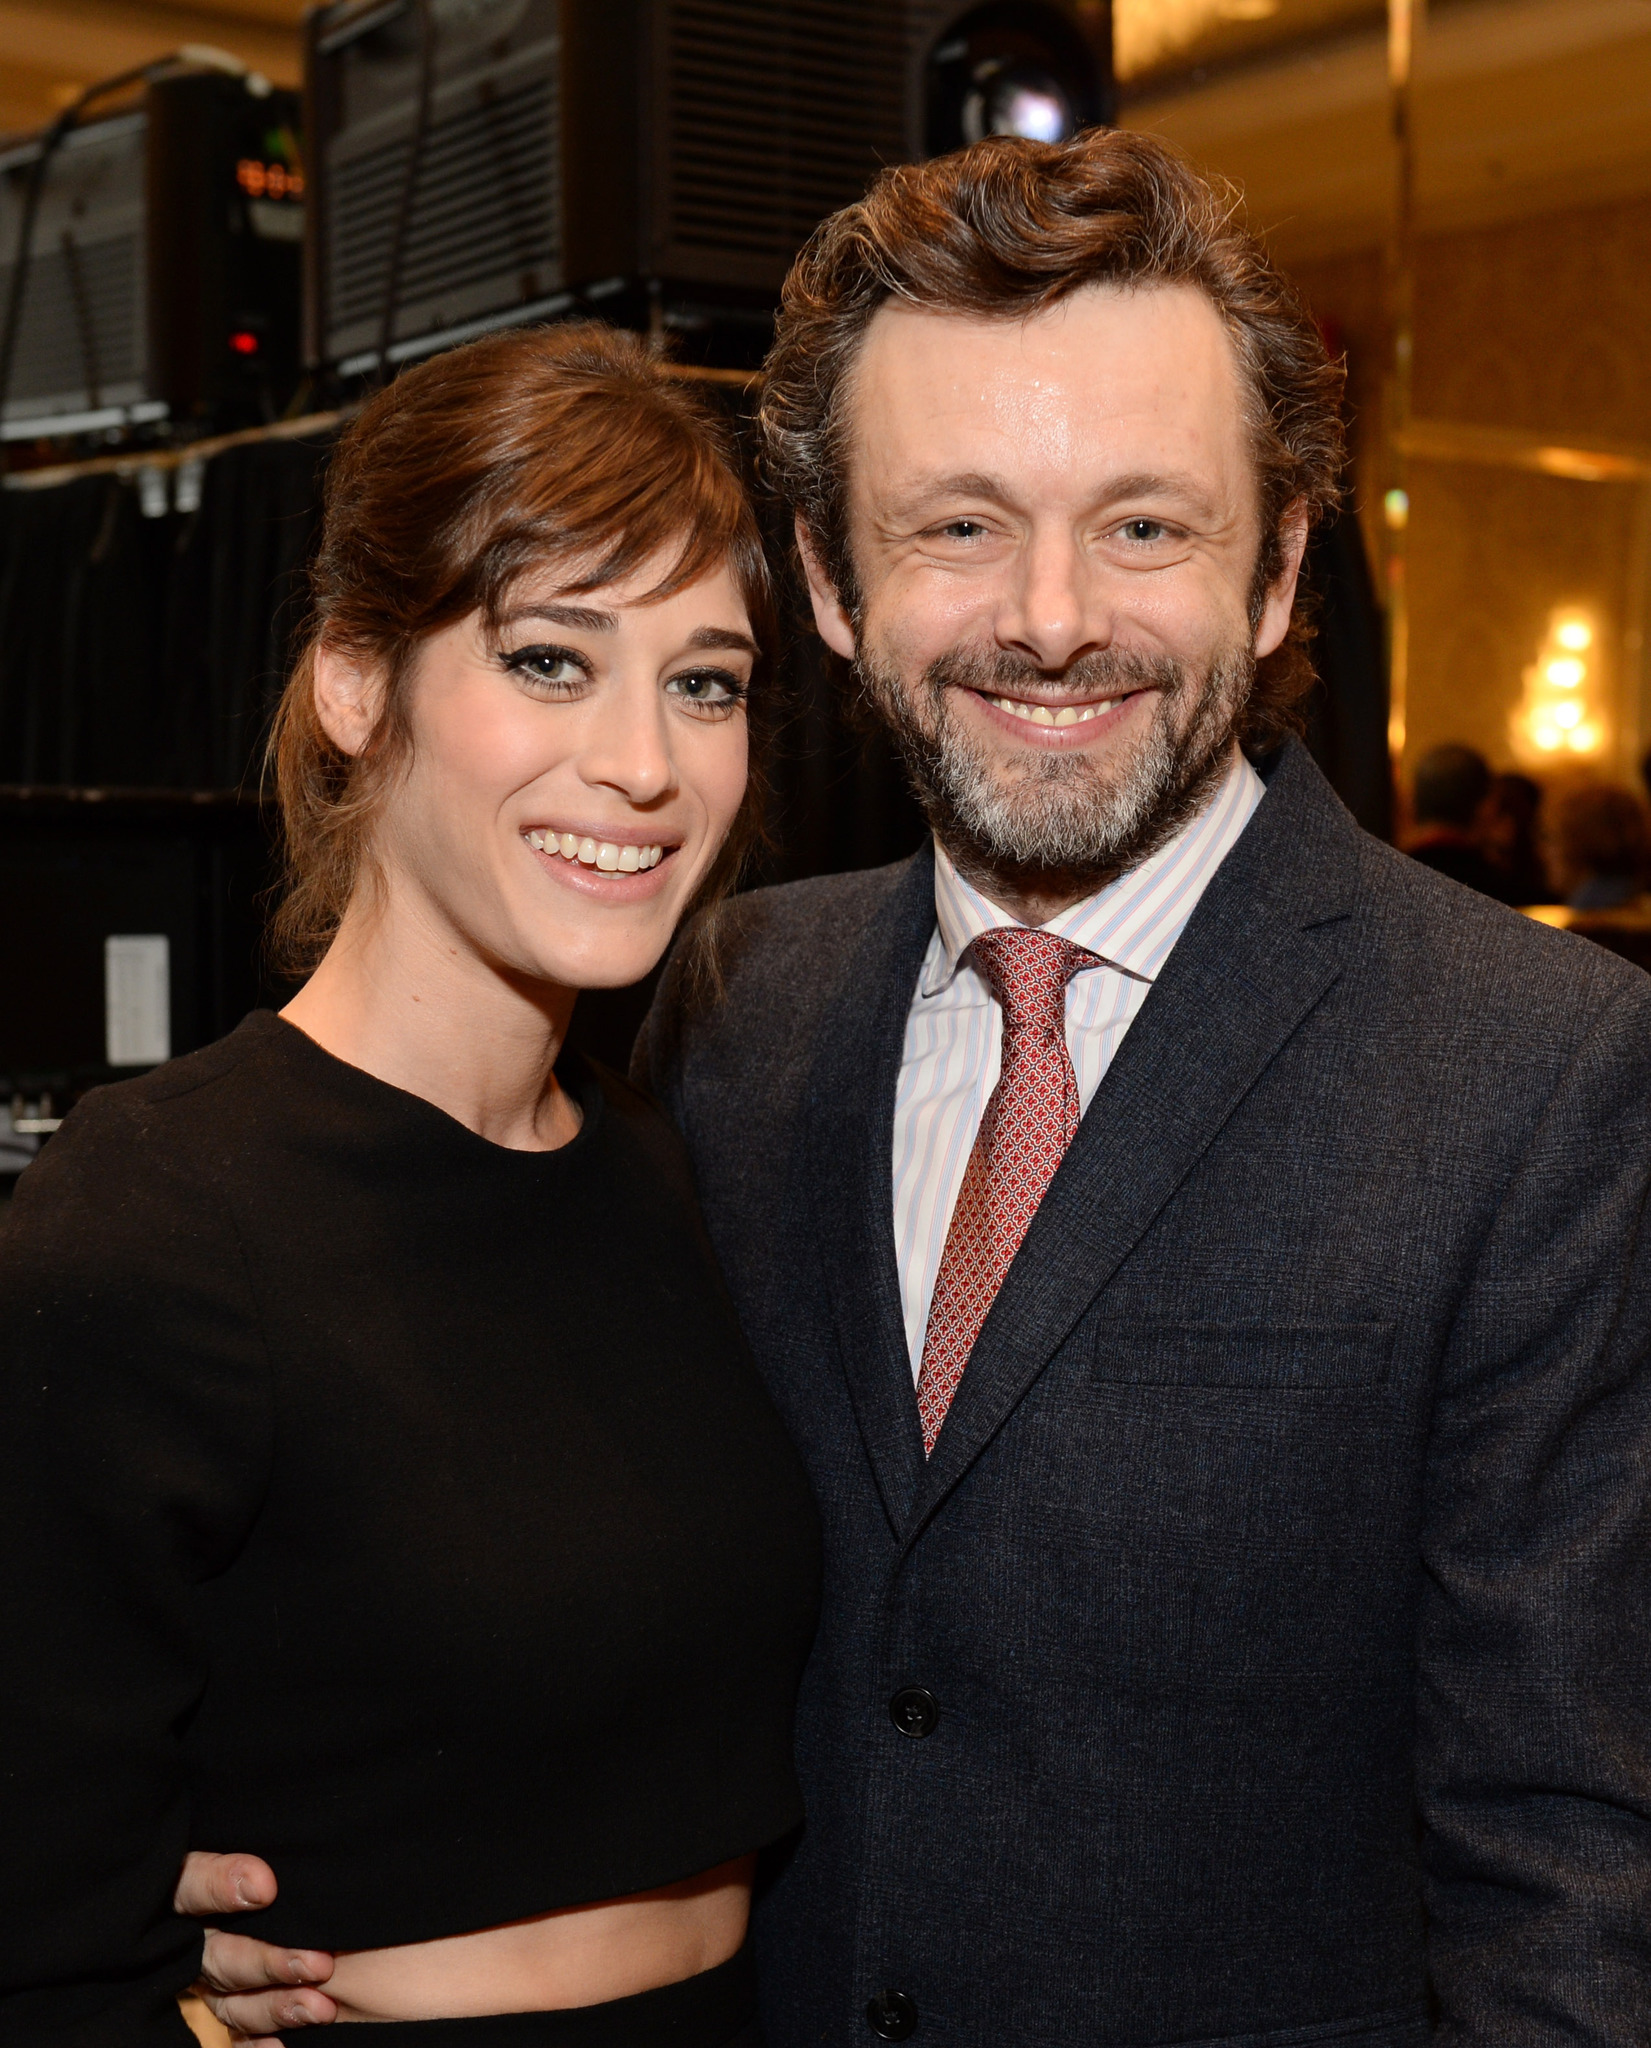 Lizzy Caplan and Michael Sheen